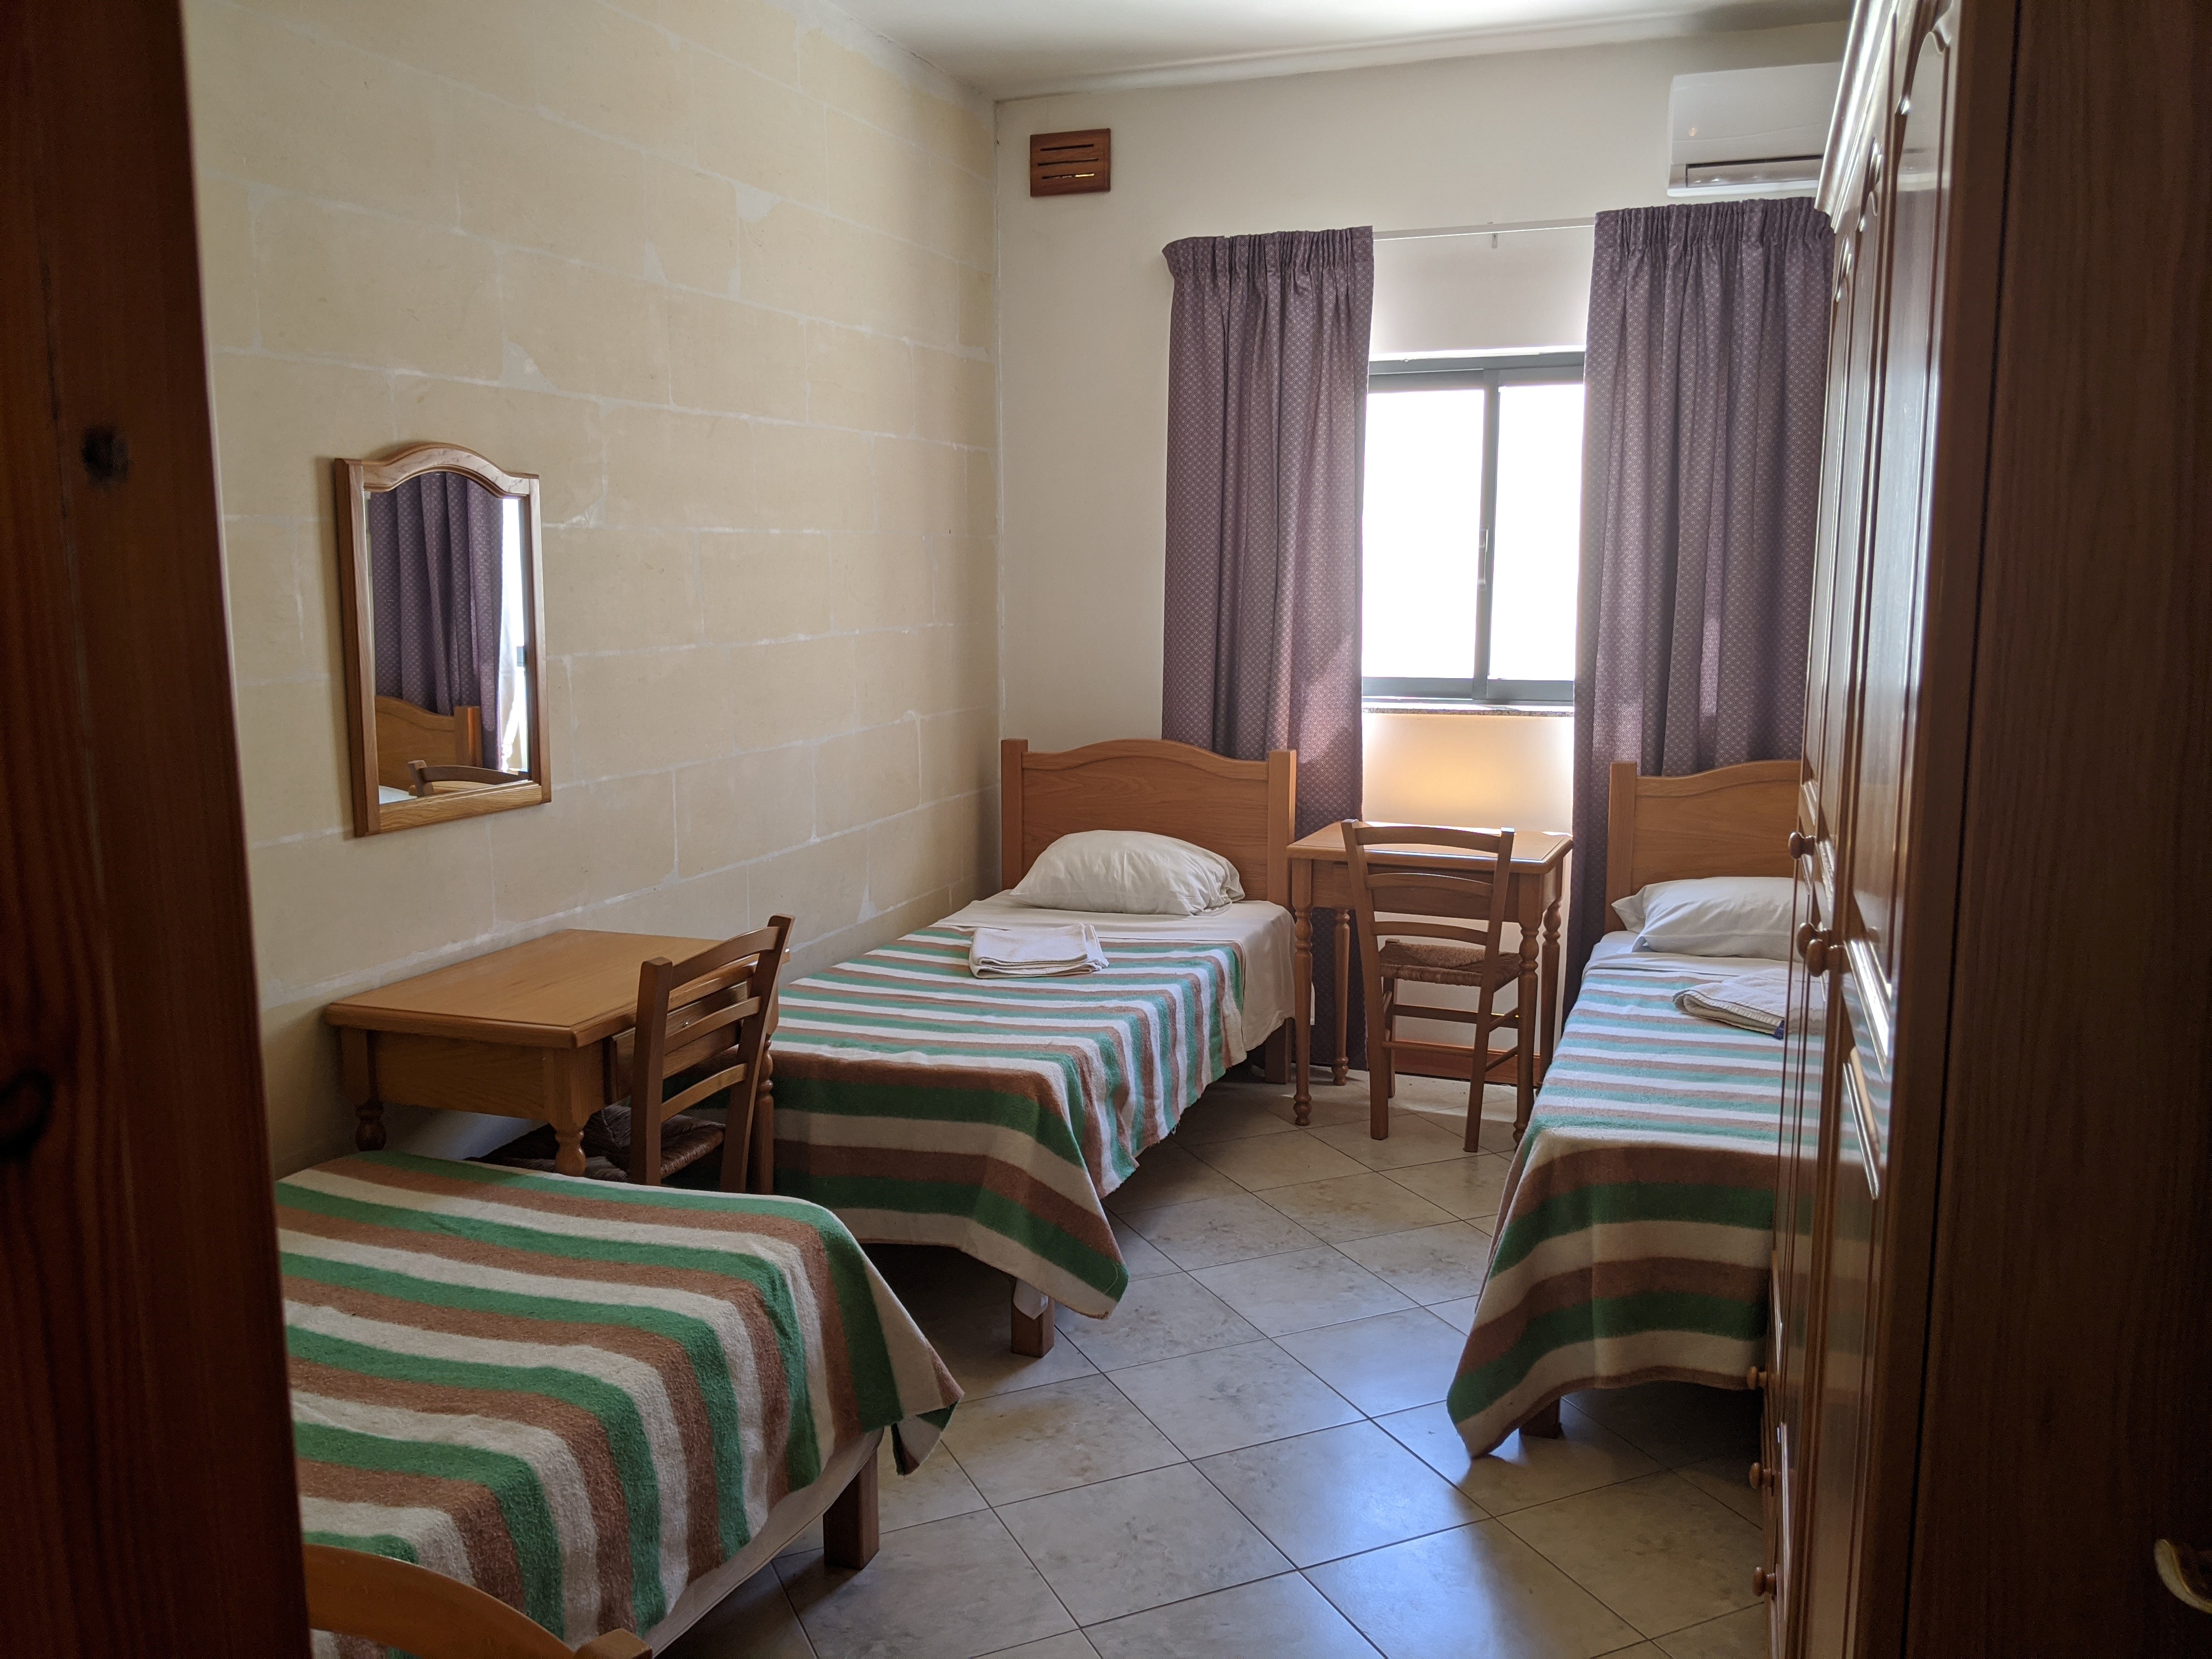 Study English in Malta - GSE Residence bedrooms next to school - all bedrooms have natural light